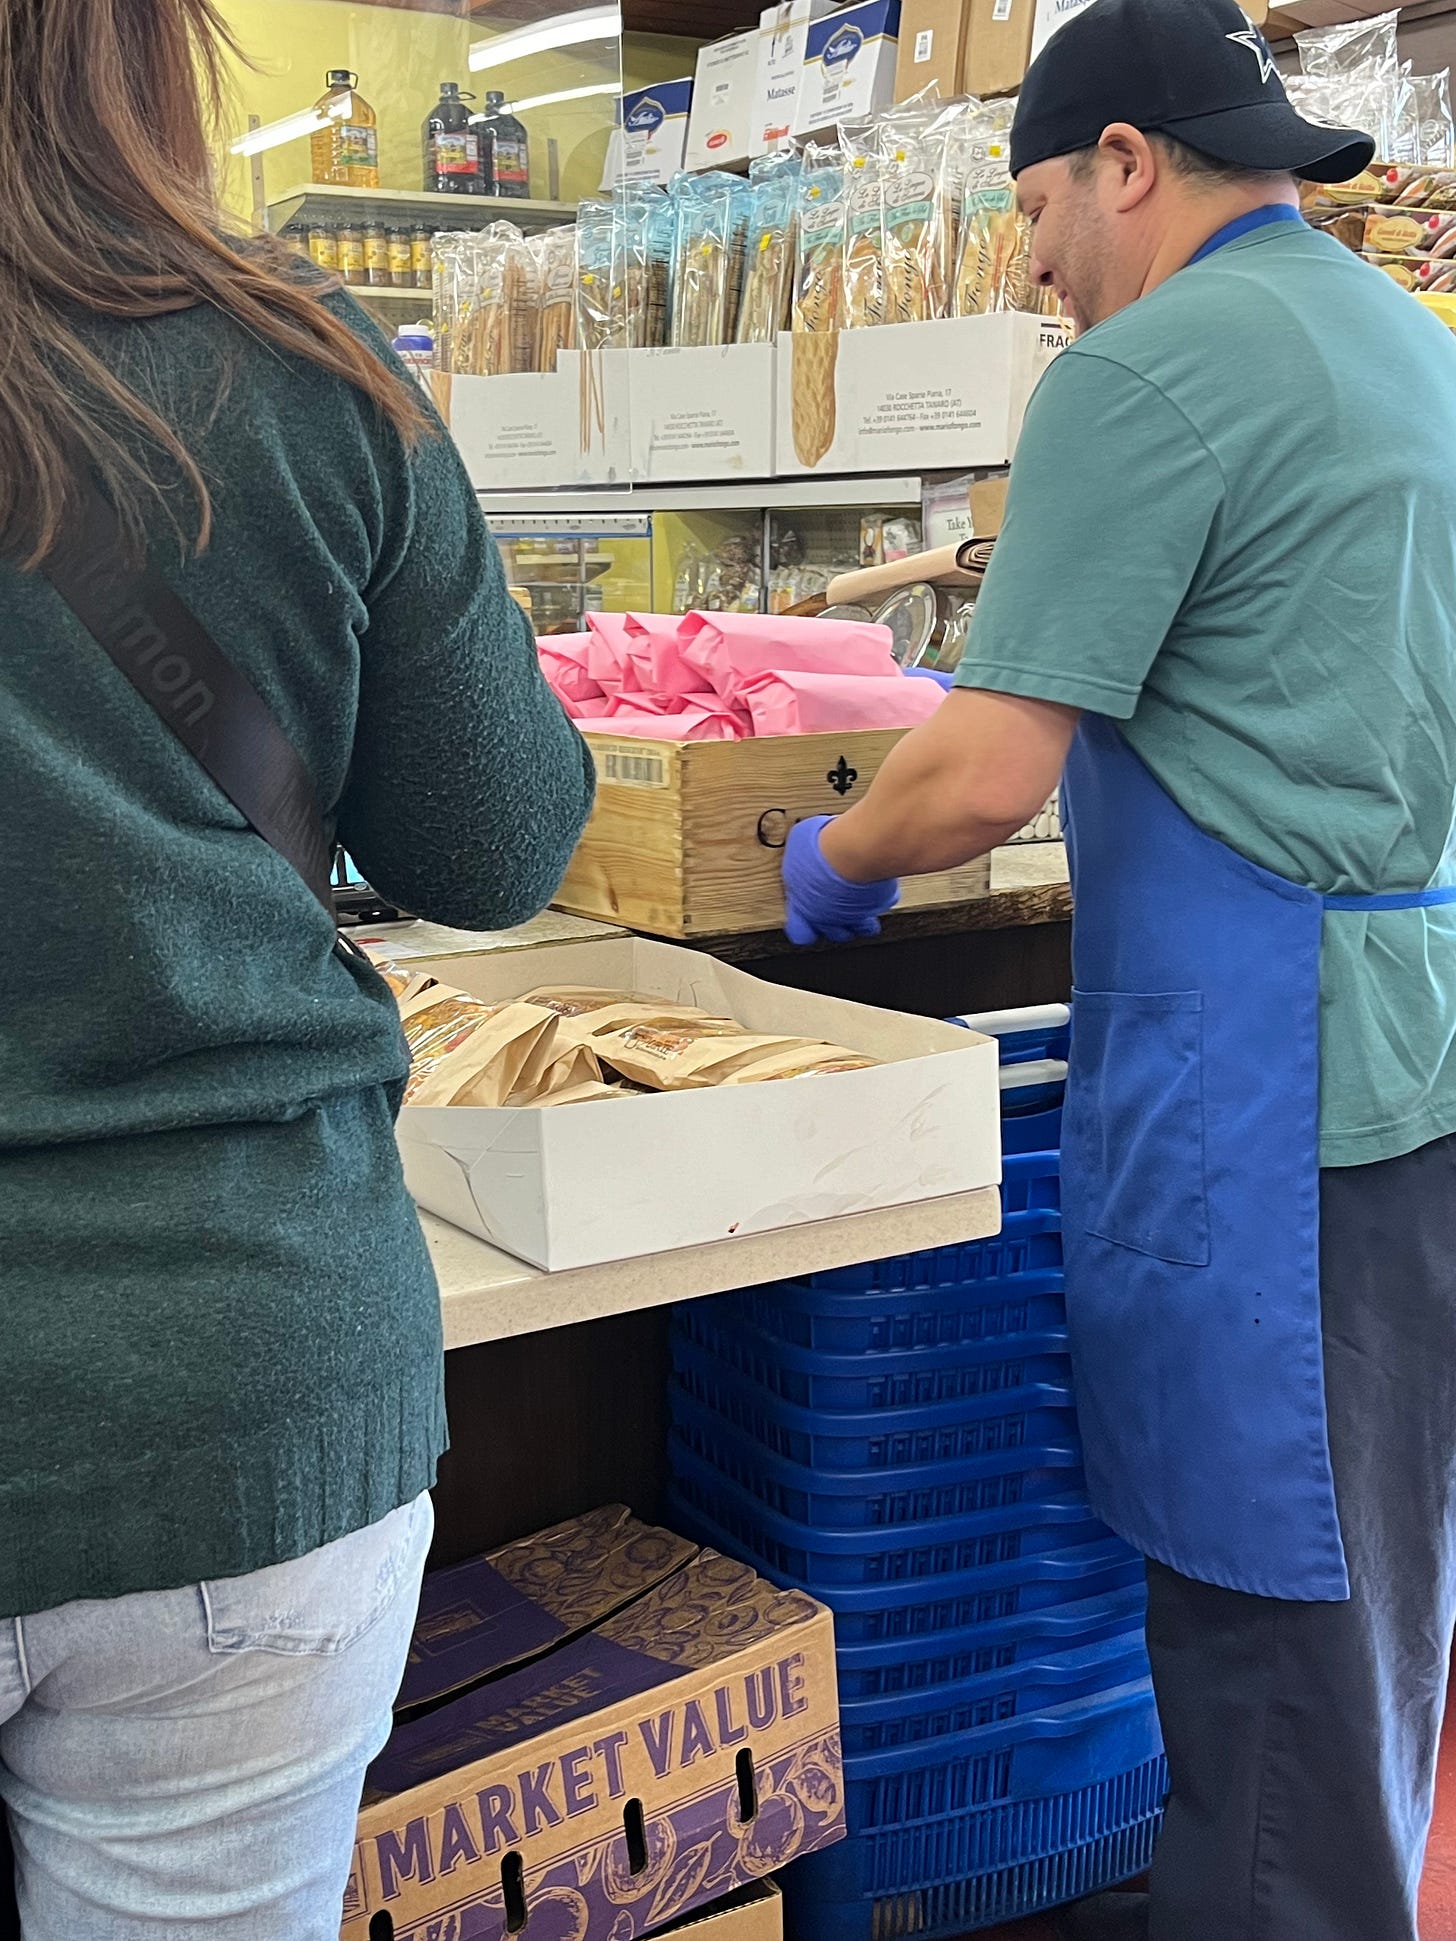 Man restocking pink butcher paper-wrapped sandwiches inside a deli.